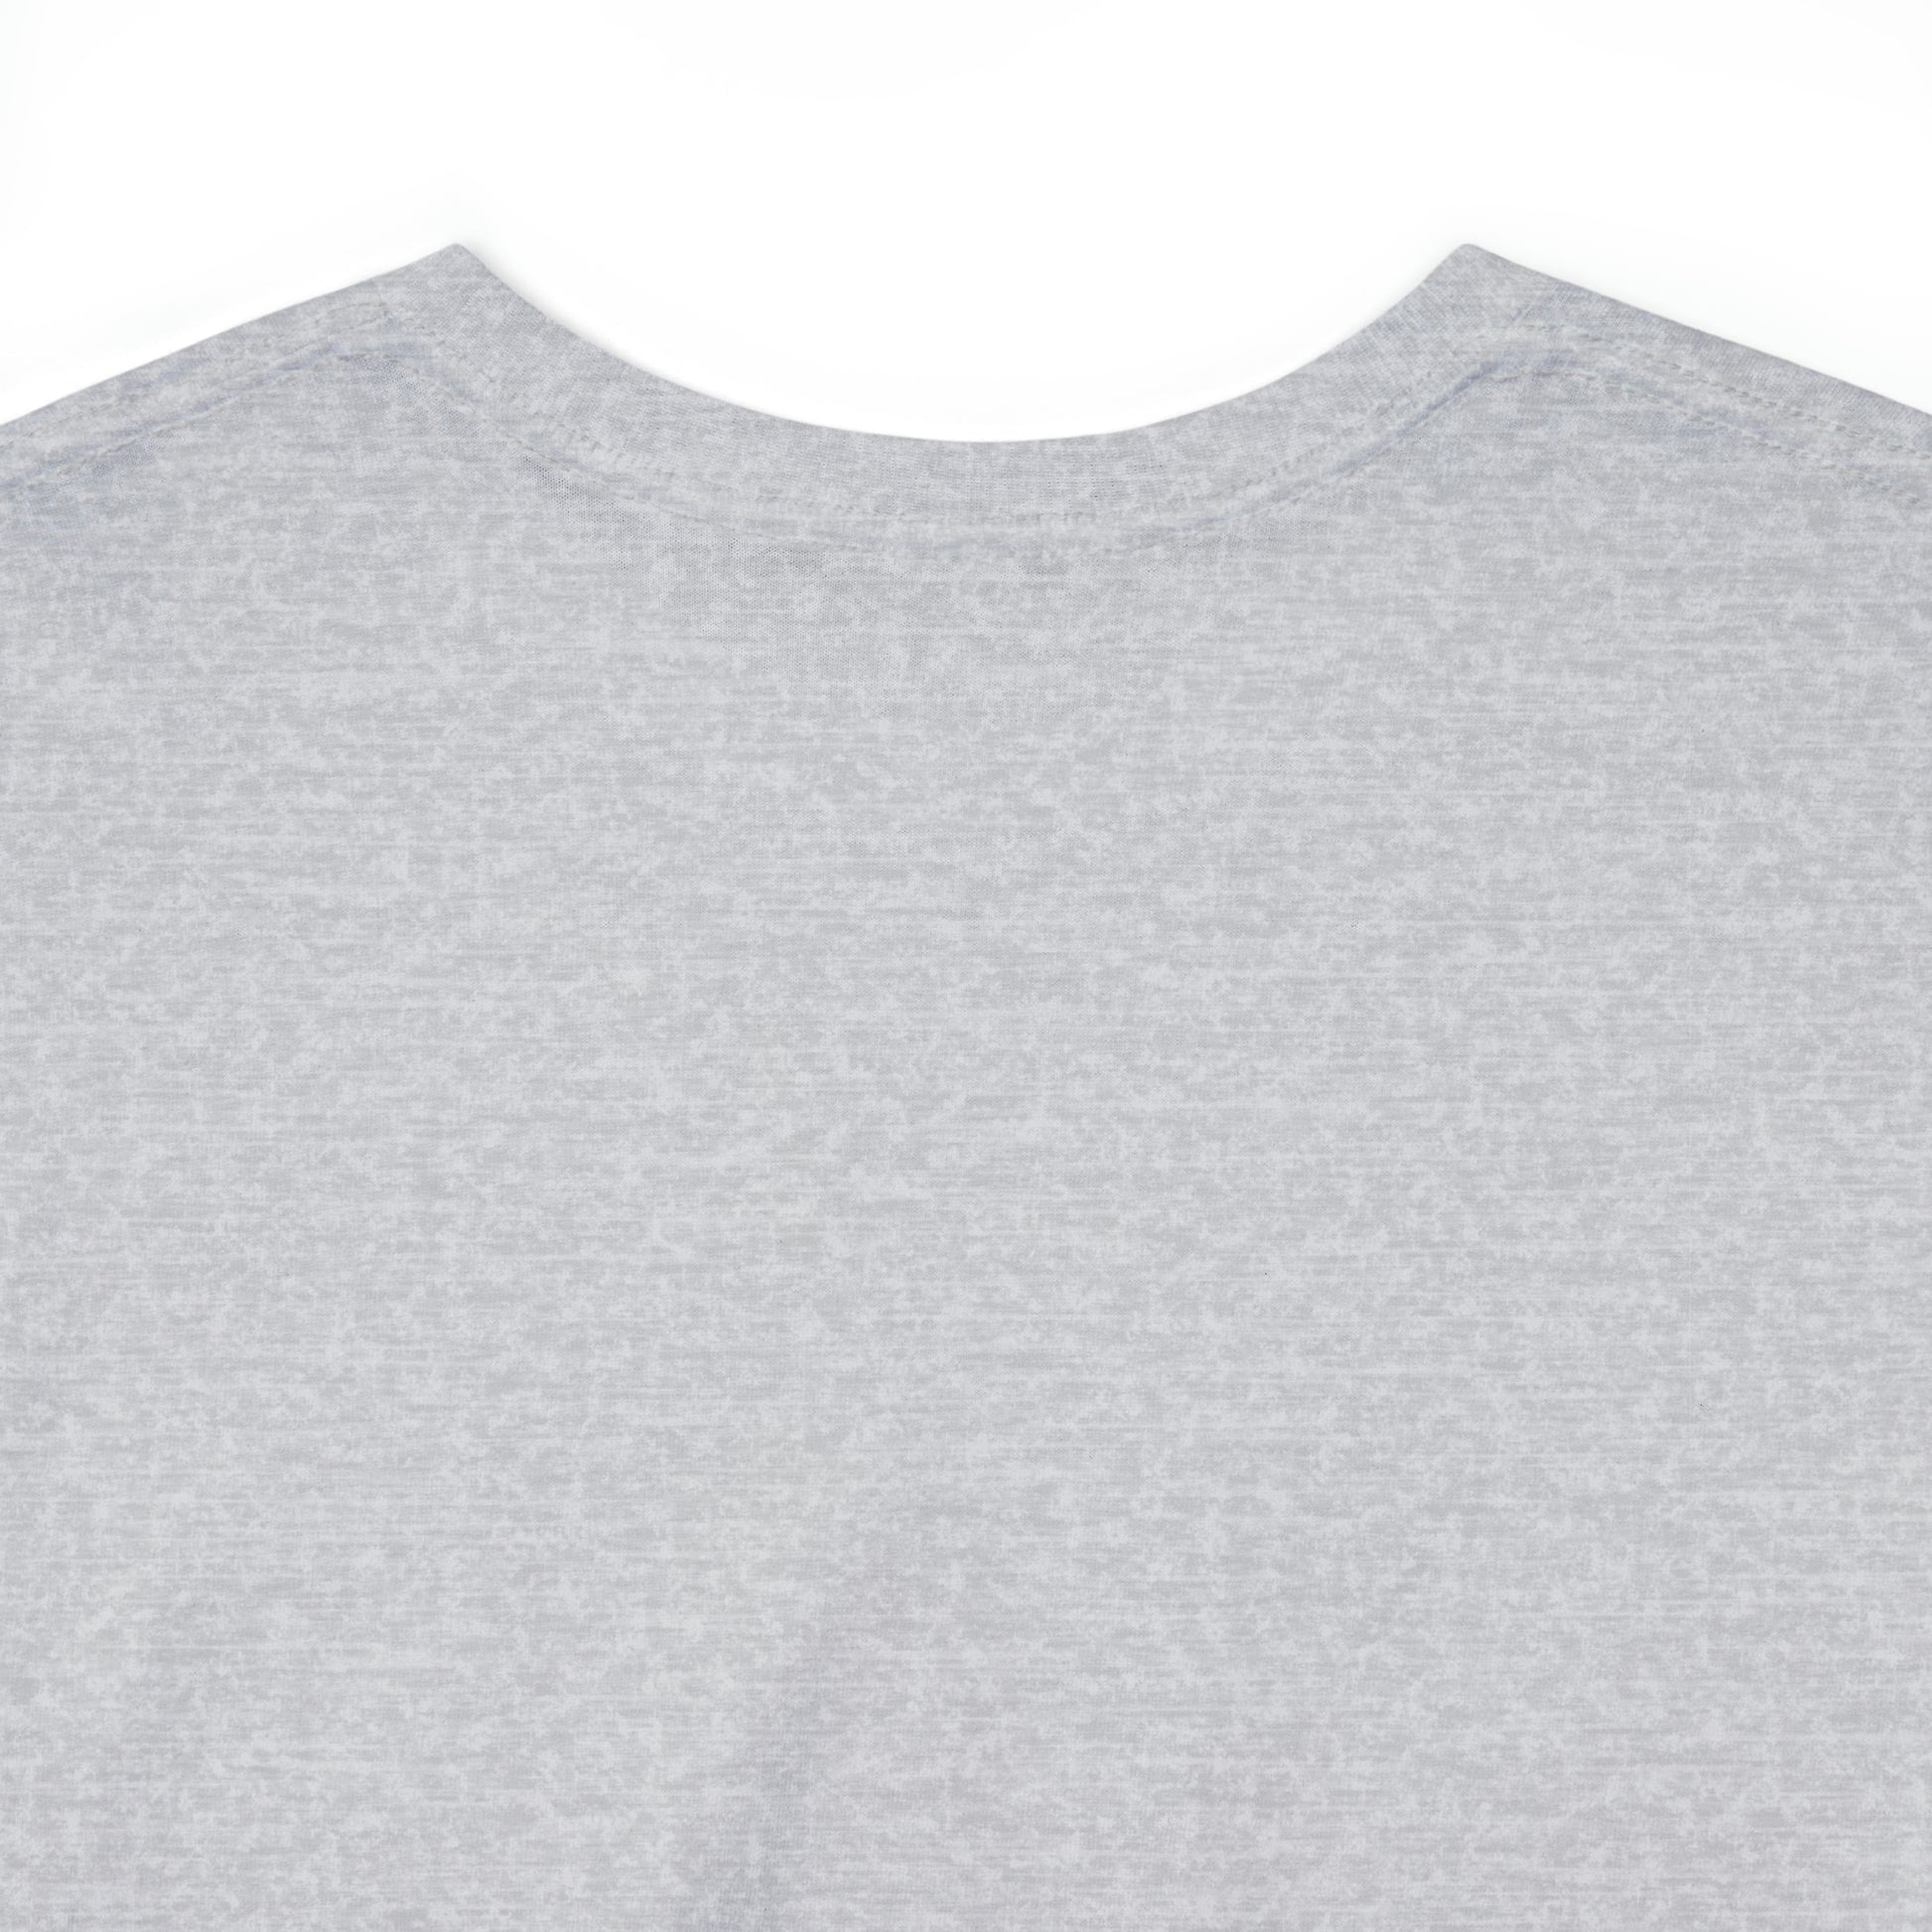 Close up of the back view of the neck on the Sports Grey t-shirt